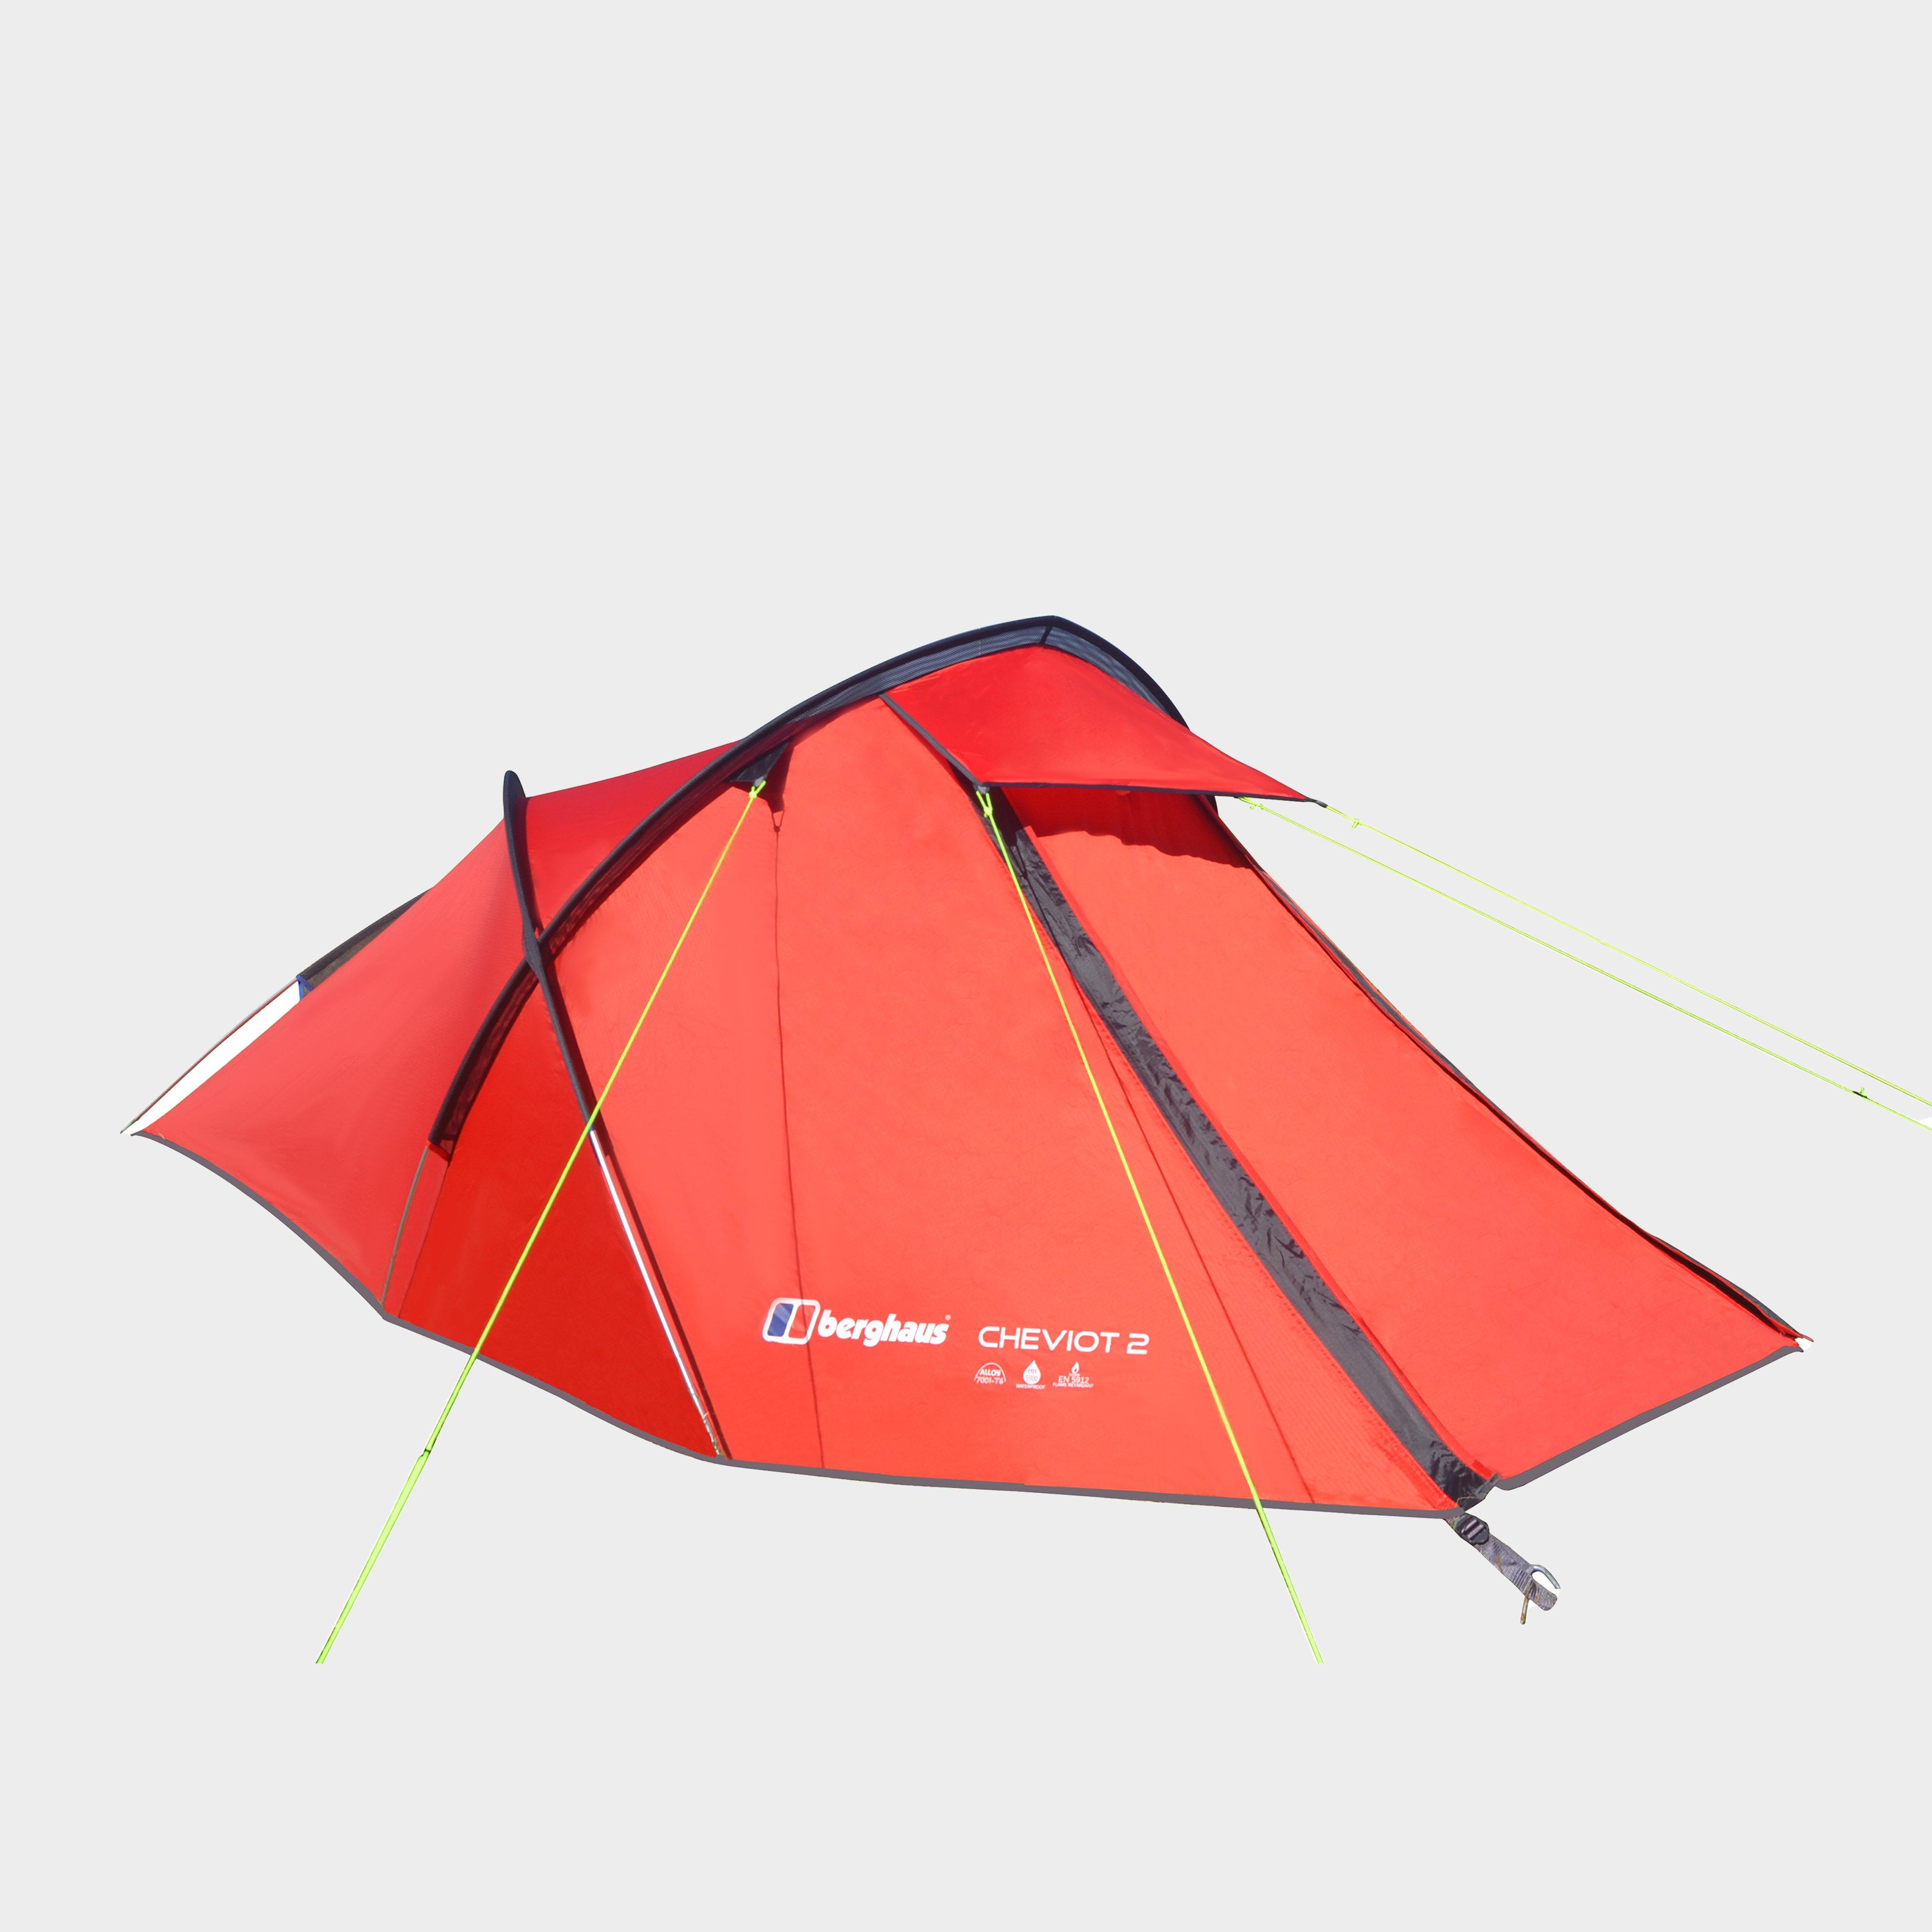 Berghaus Cheviot 2 Tent - Red, RED